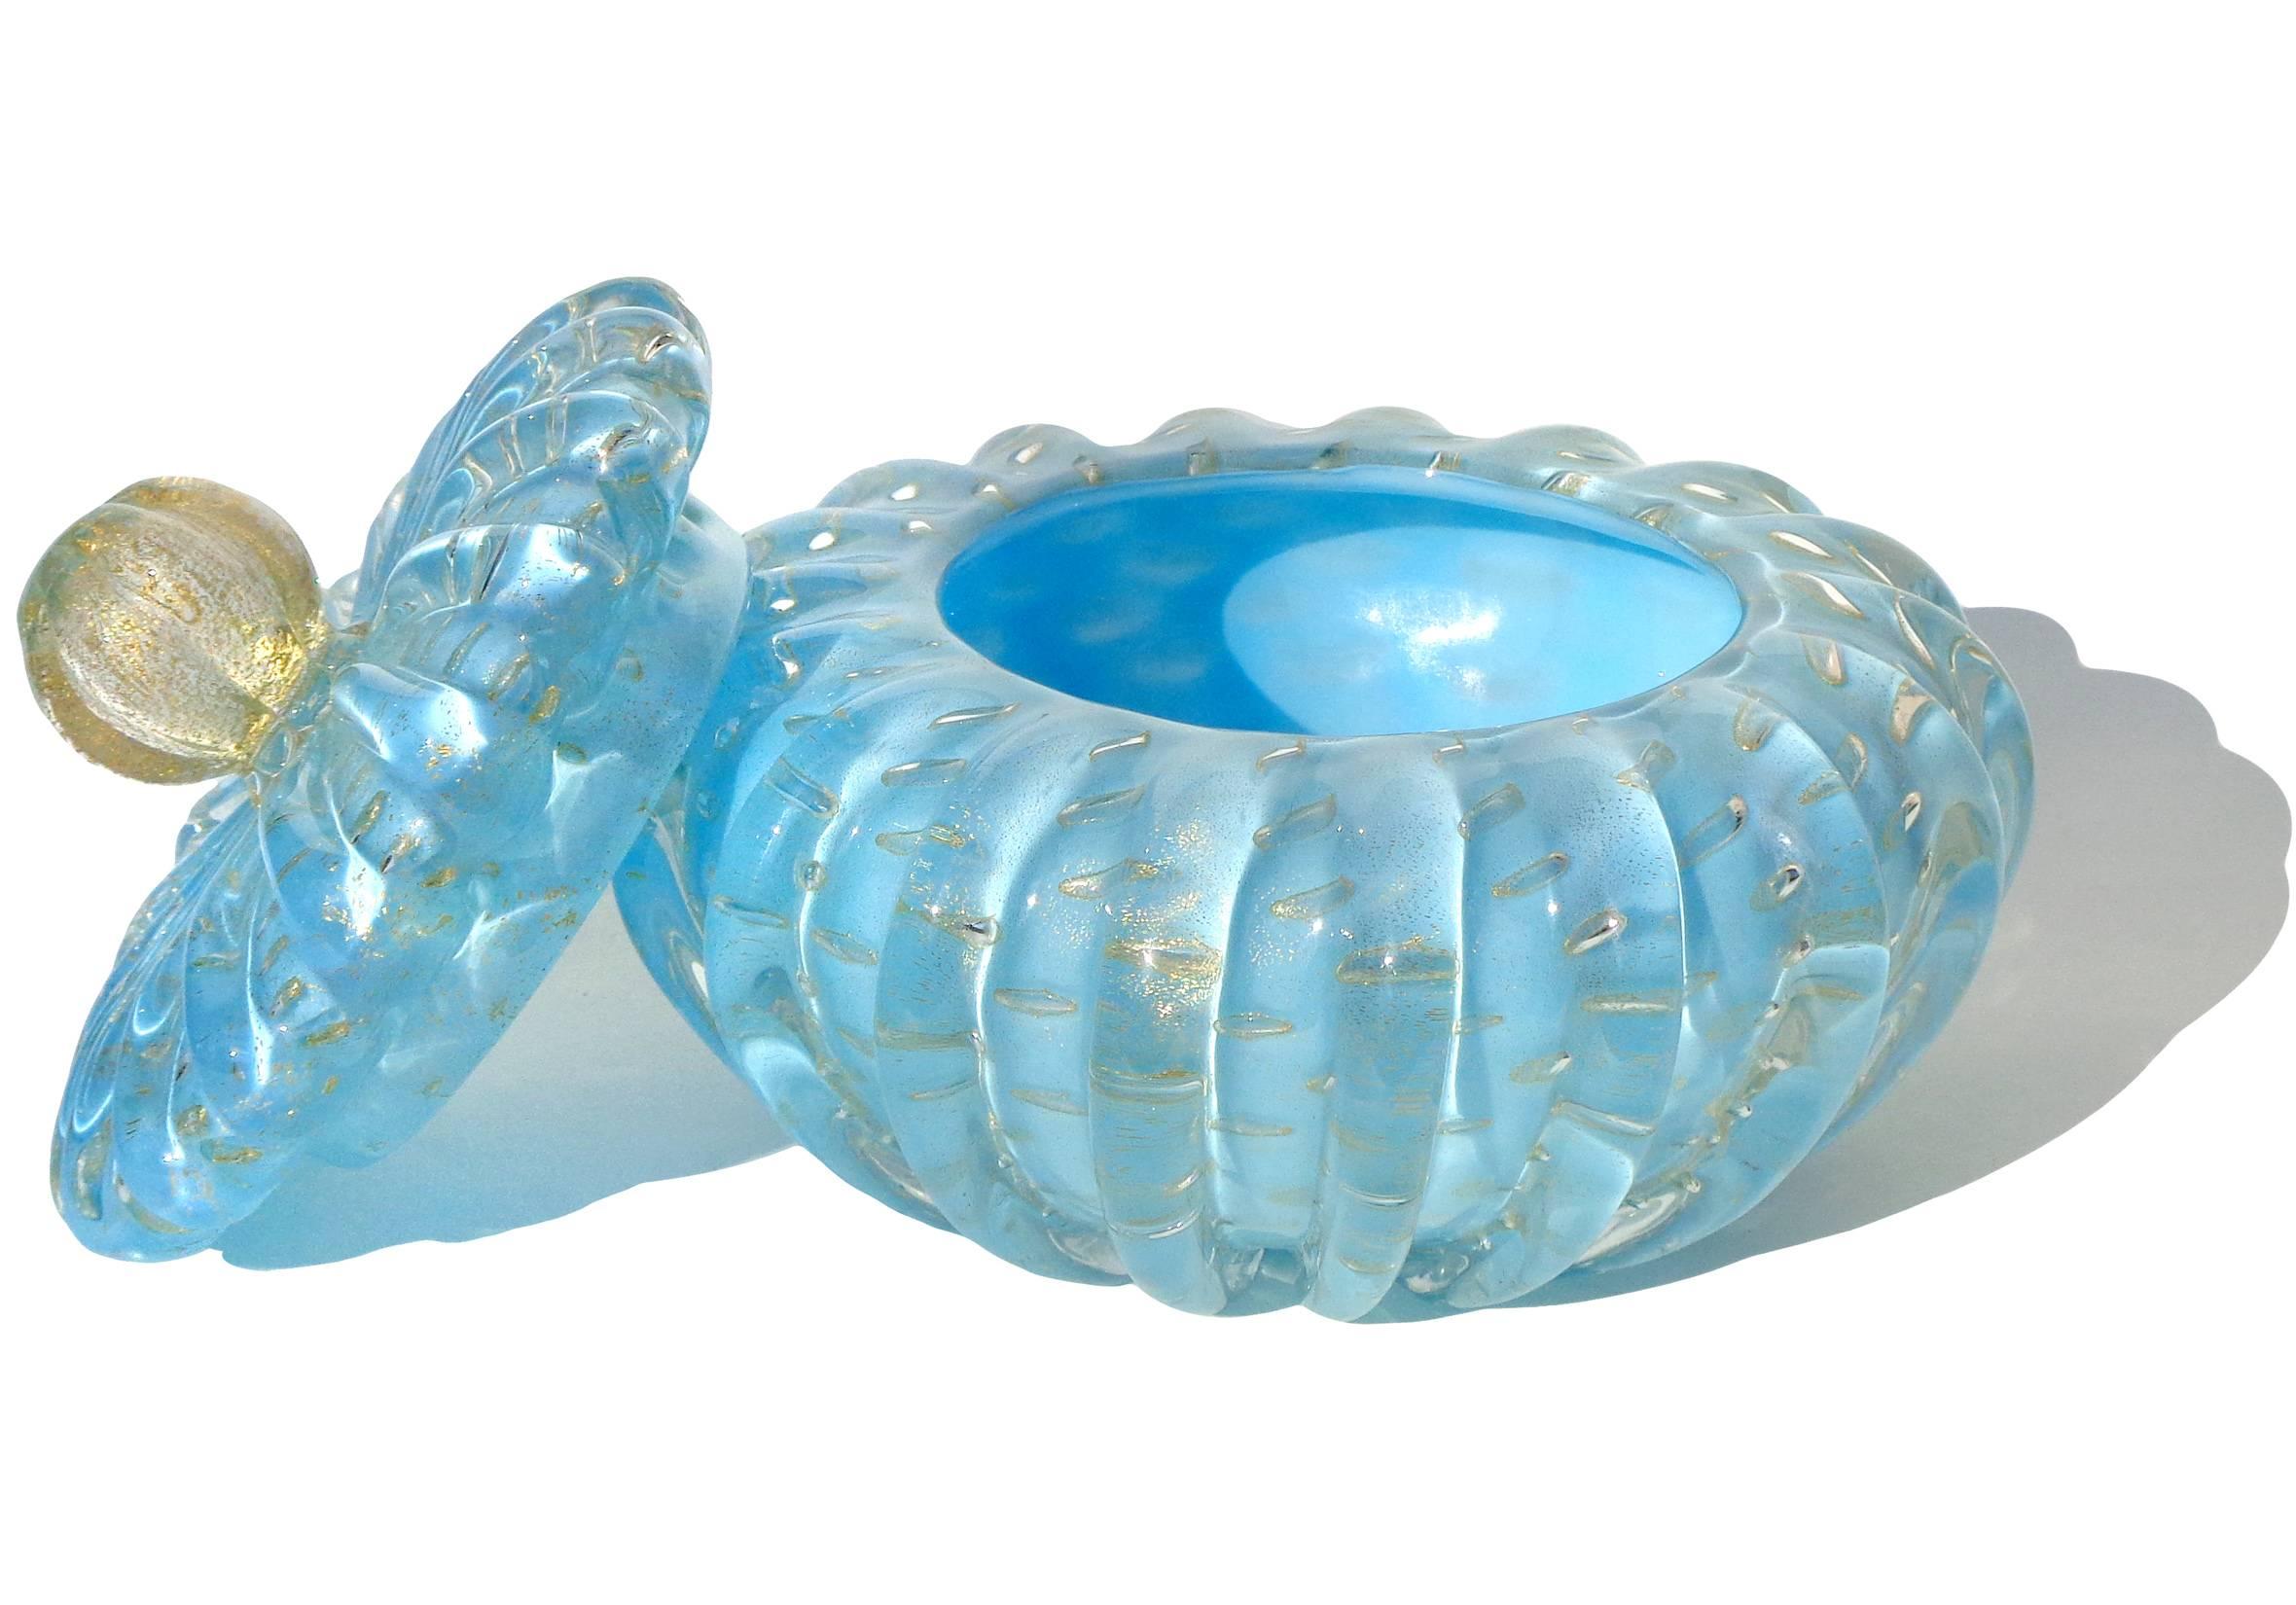 Gorgeous large Murano hand blown blue, gold flecks and controlled bubbles art glass powder or jewelry box. Documented to designer Alfredo Barbini. The piece has a ribbed surface, with a gold ball top decoration. The gold leaf gathers around each